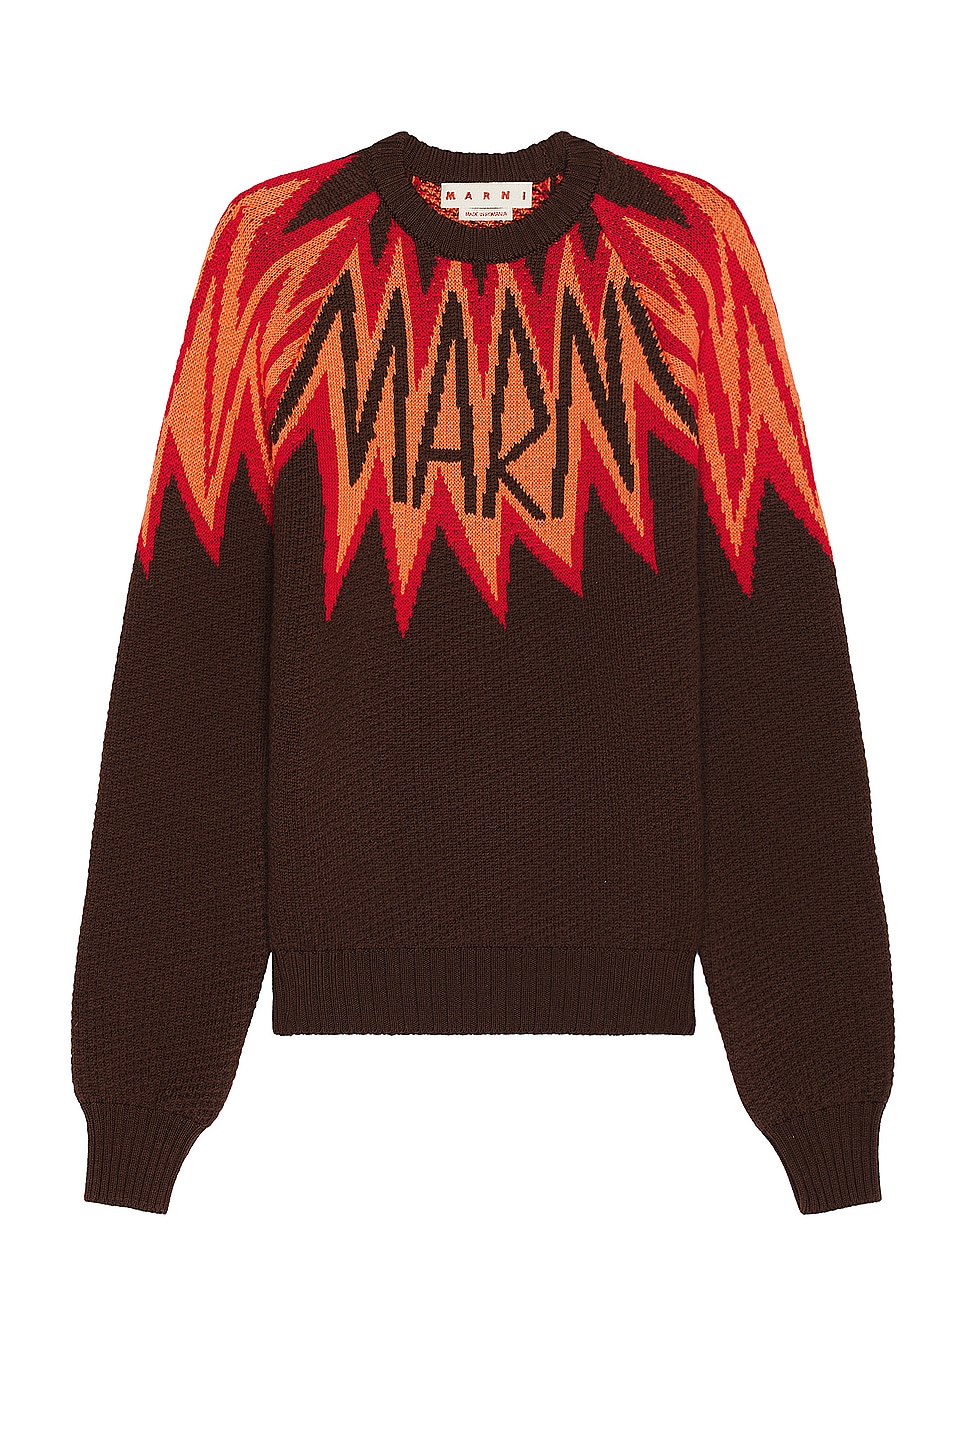 Image 1 of Marni Roundneck Sweater in Chestnut